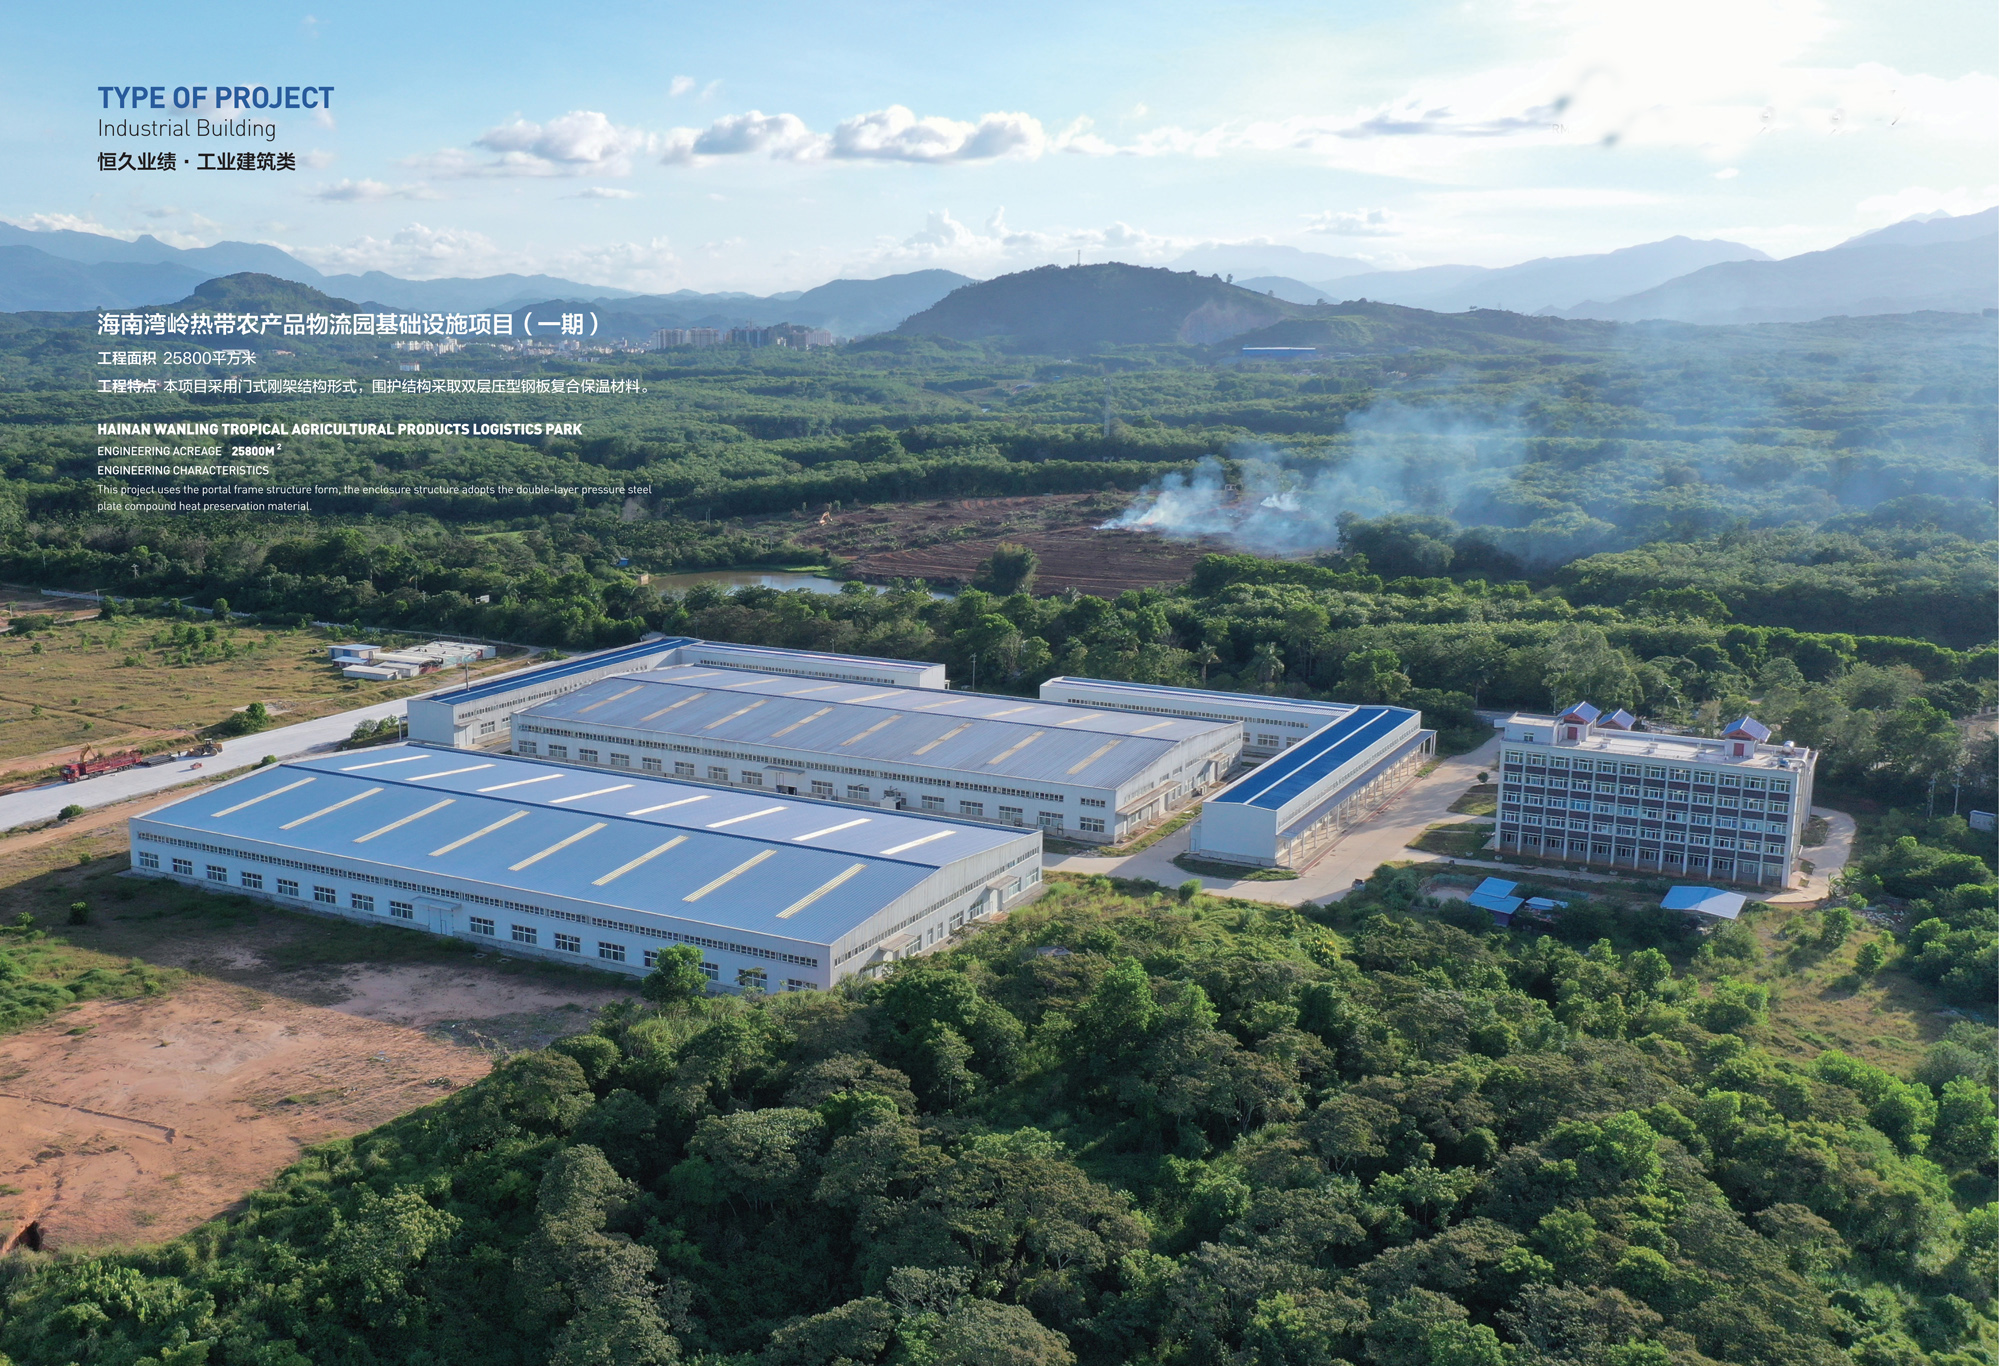 Hainan Wanling Tropical Agricultural Products Logistics Park Infrastructure Project